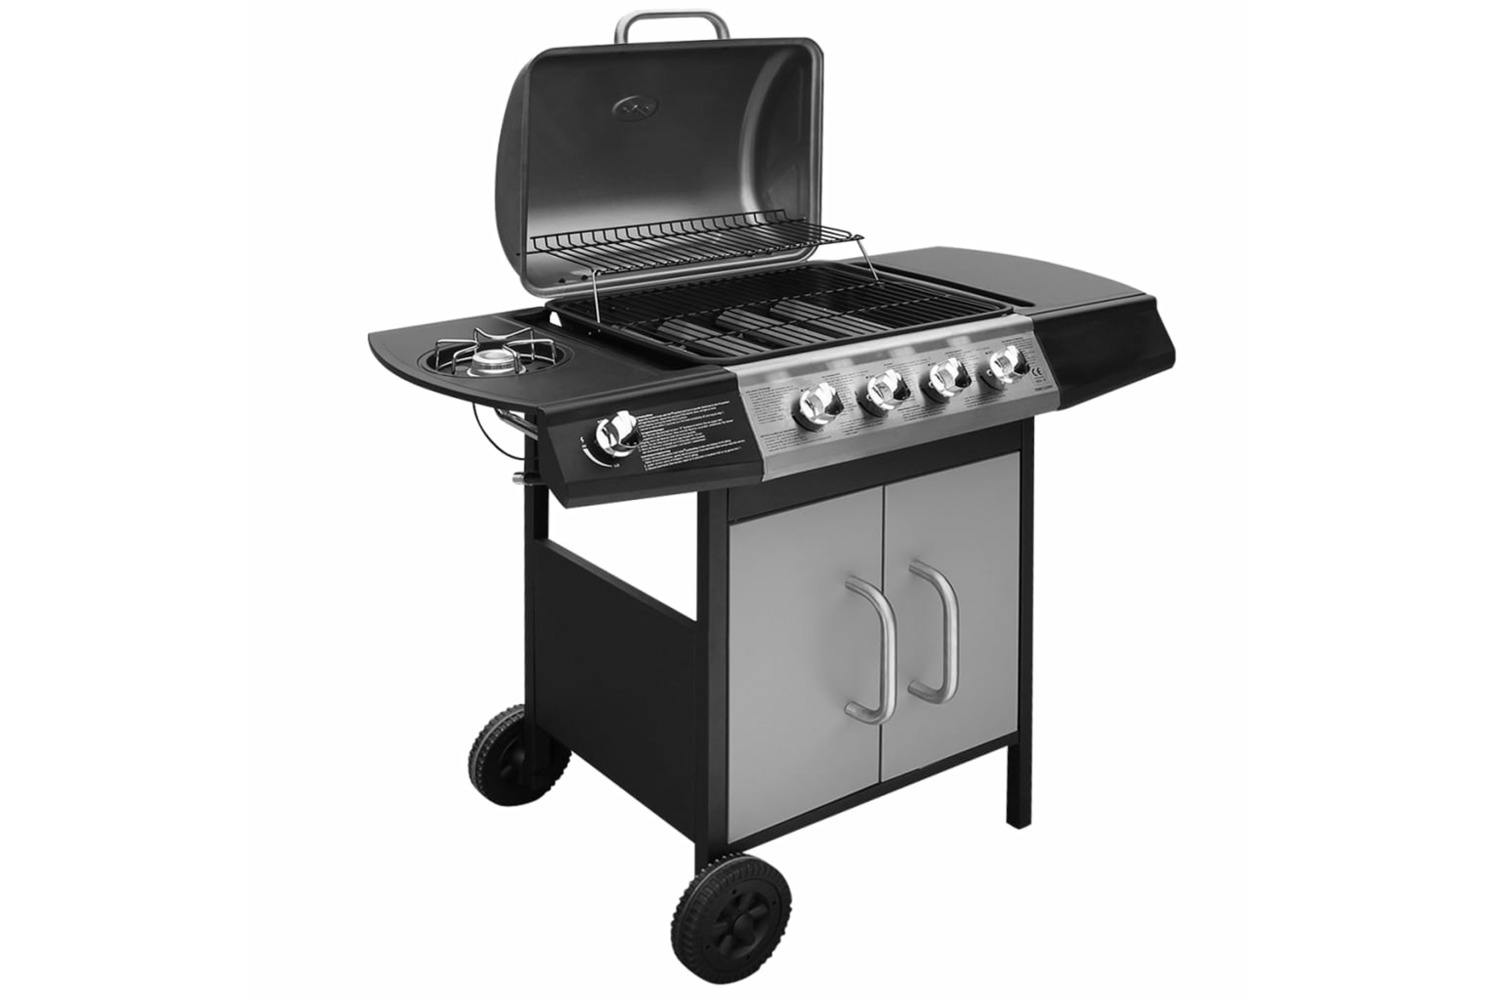 Vidaxl 273790 Gas Barbecue Grill 4+1 Cooking Zone Black And Silver